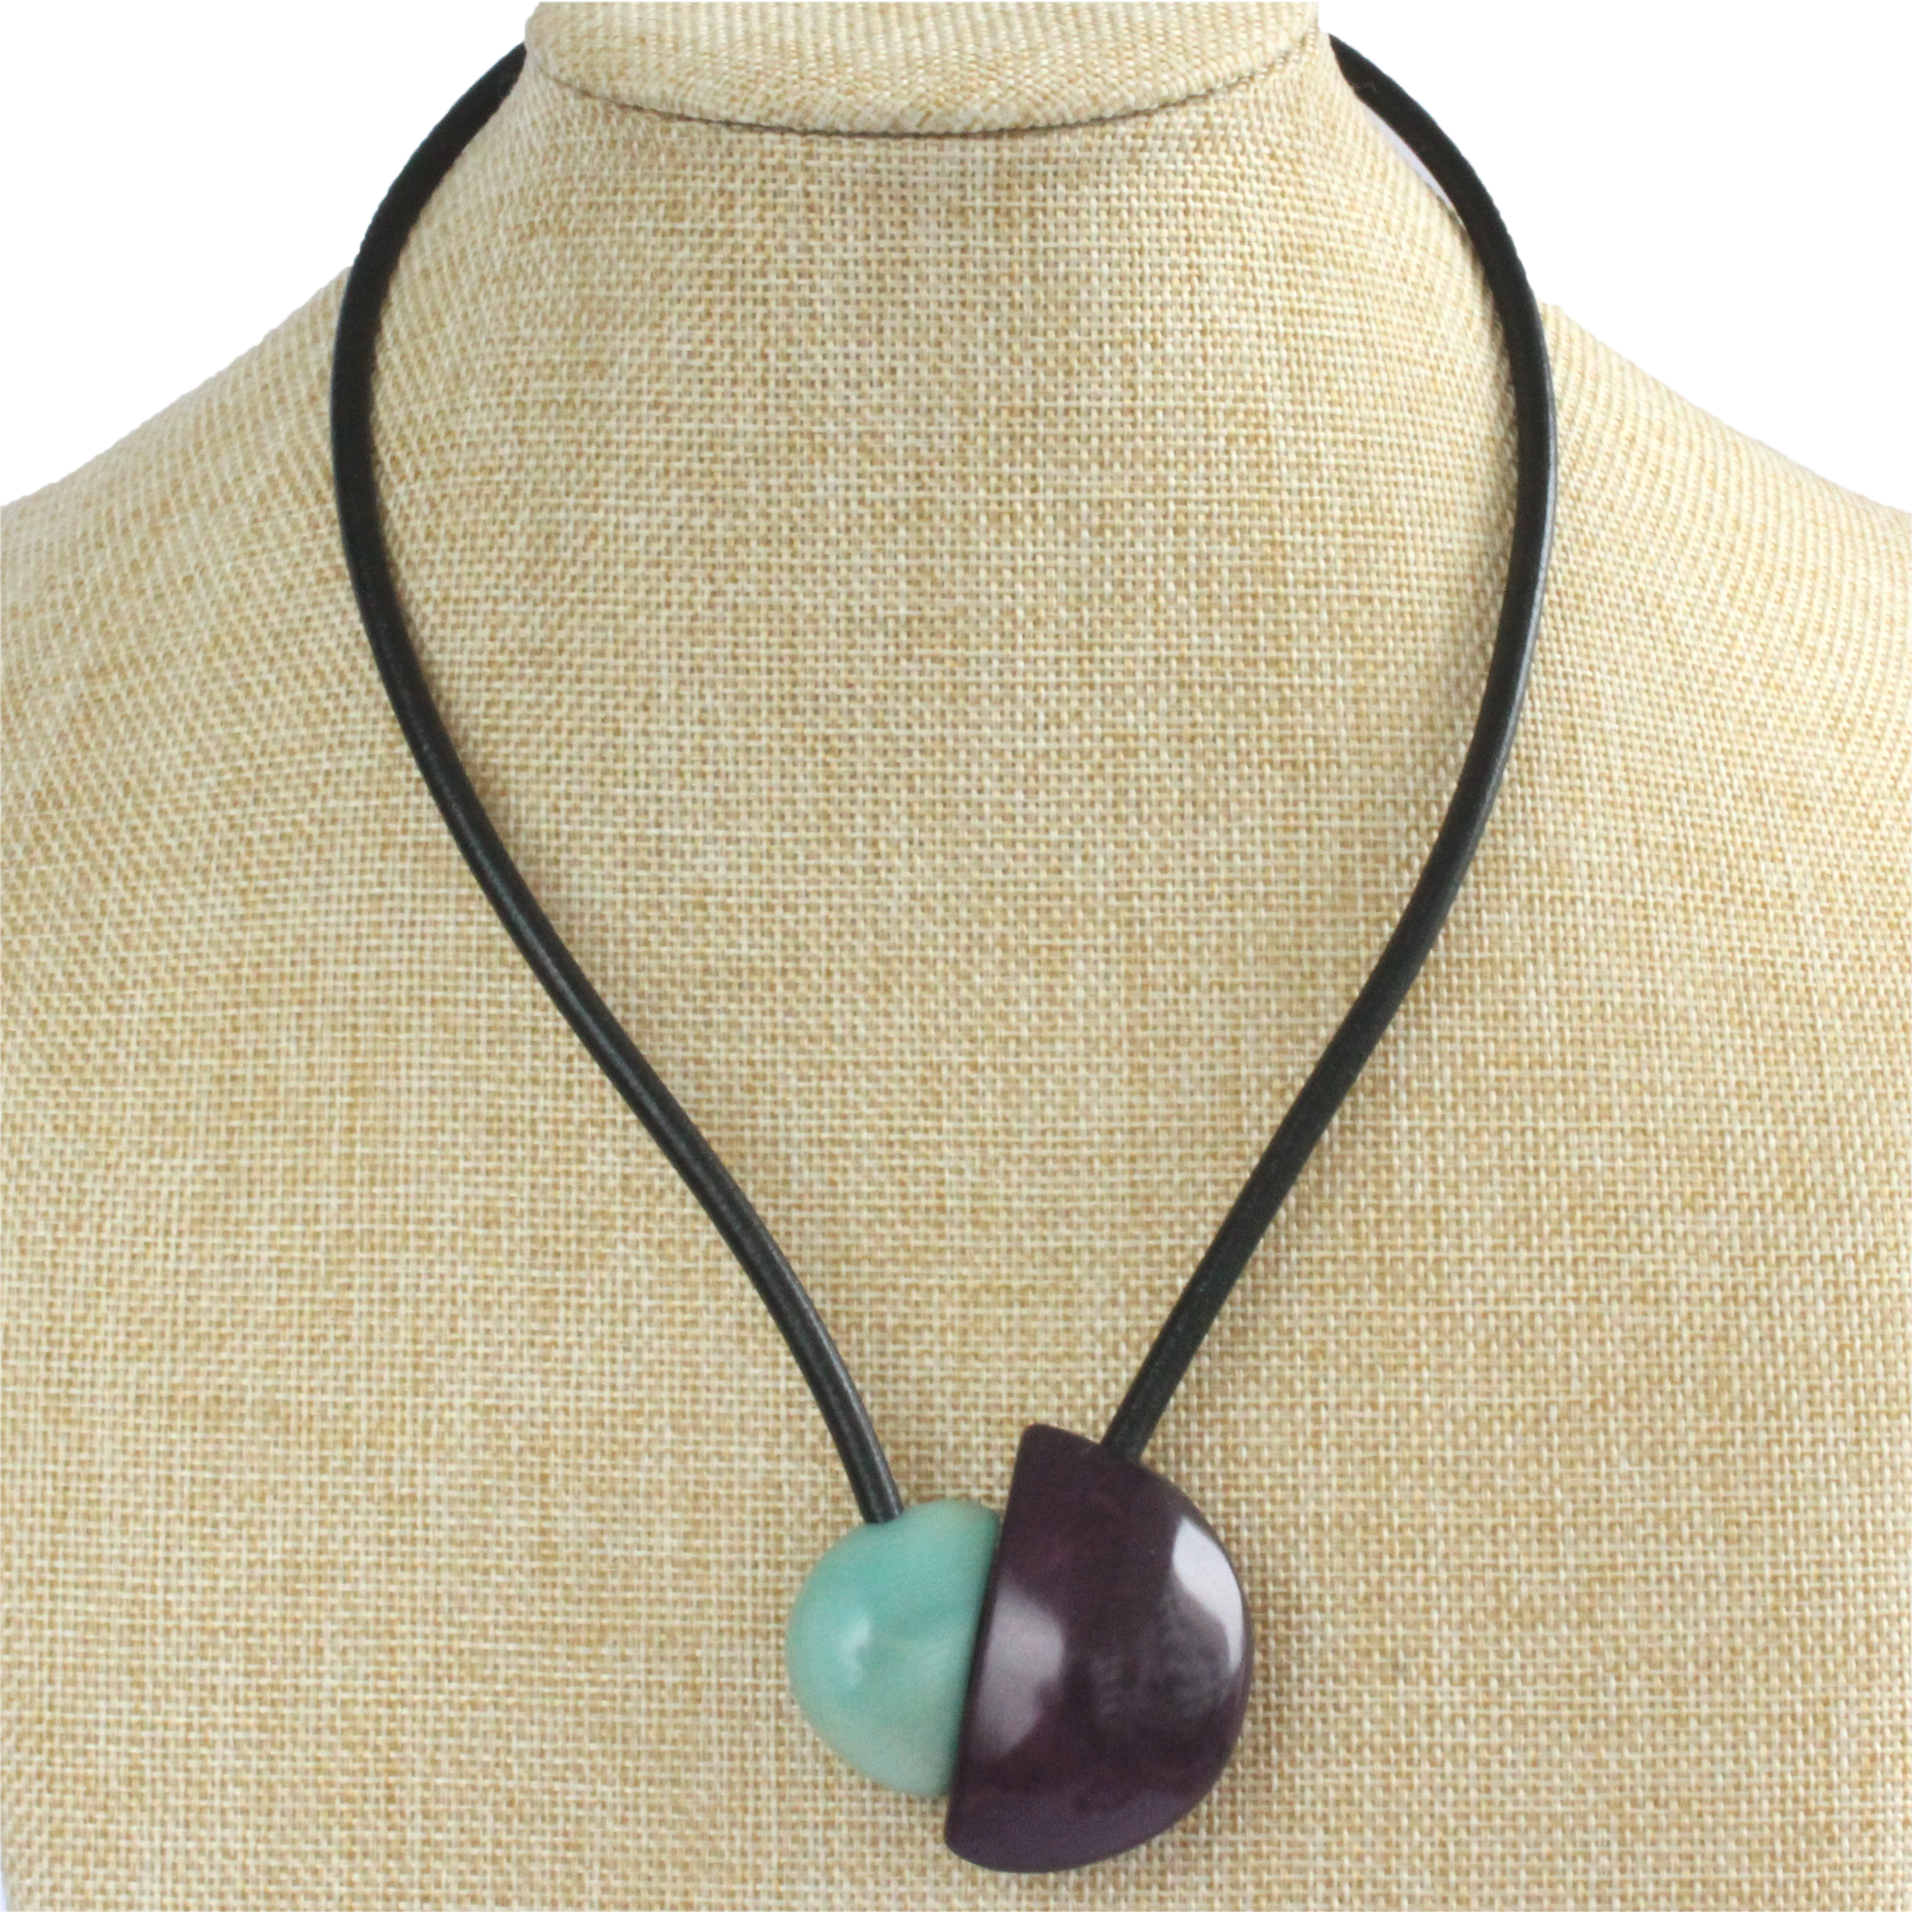 Handmade necklace, tagua nut, turquoise purple, stand, magnetic